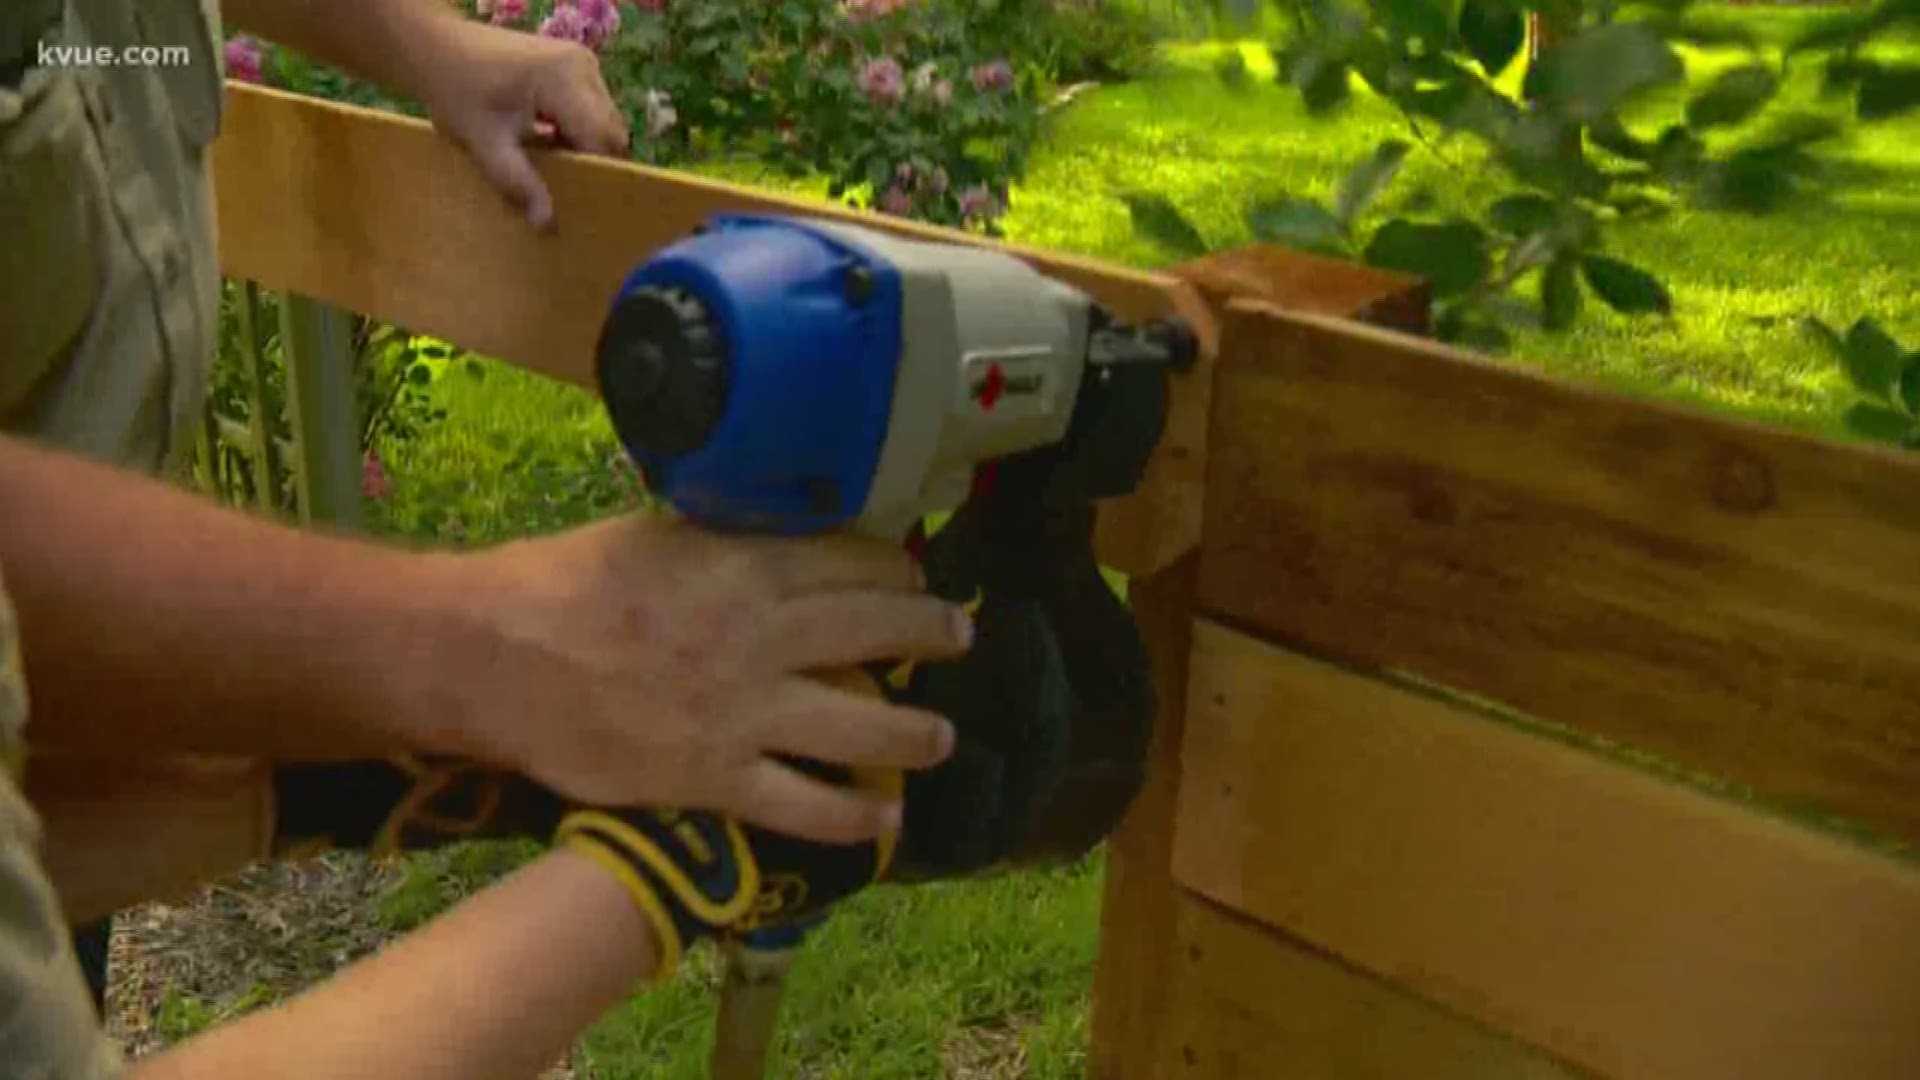 KVUE's Yvonne Nava learns how to build a fence from scratch.